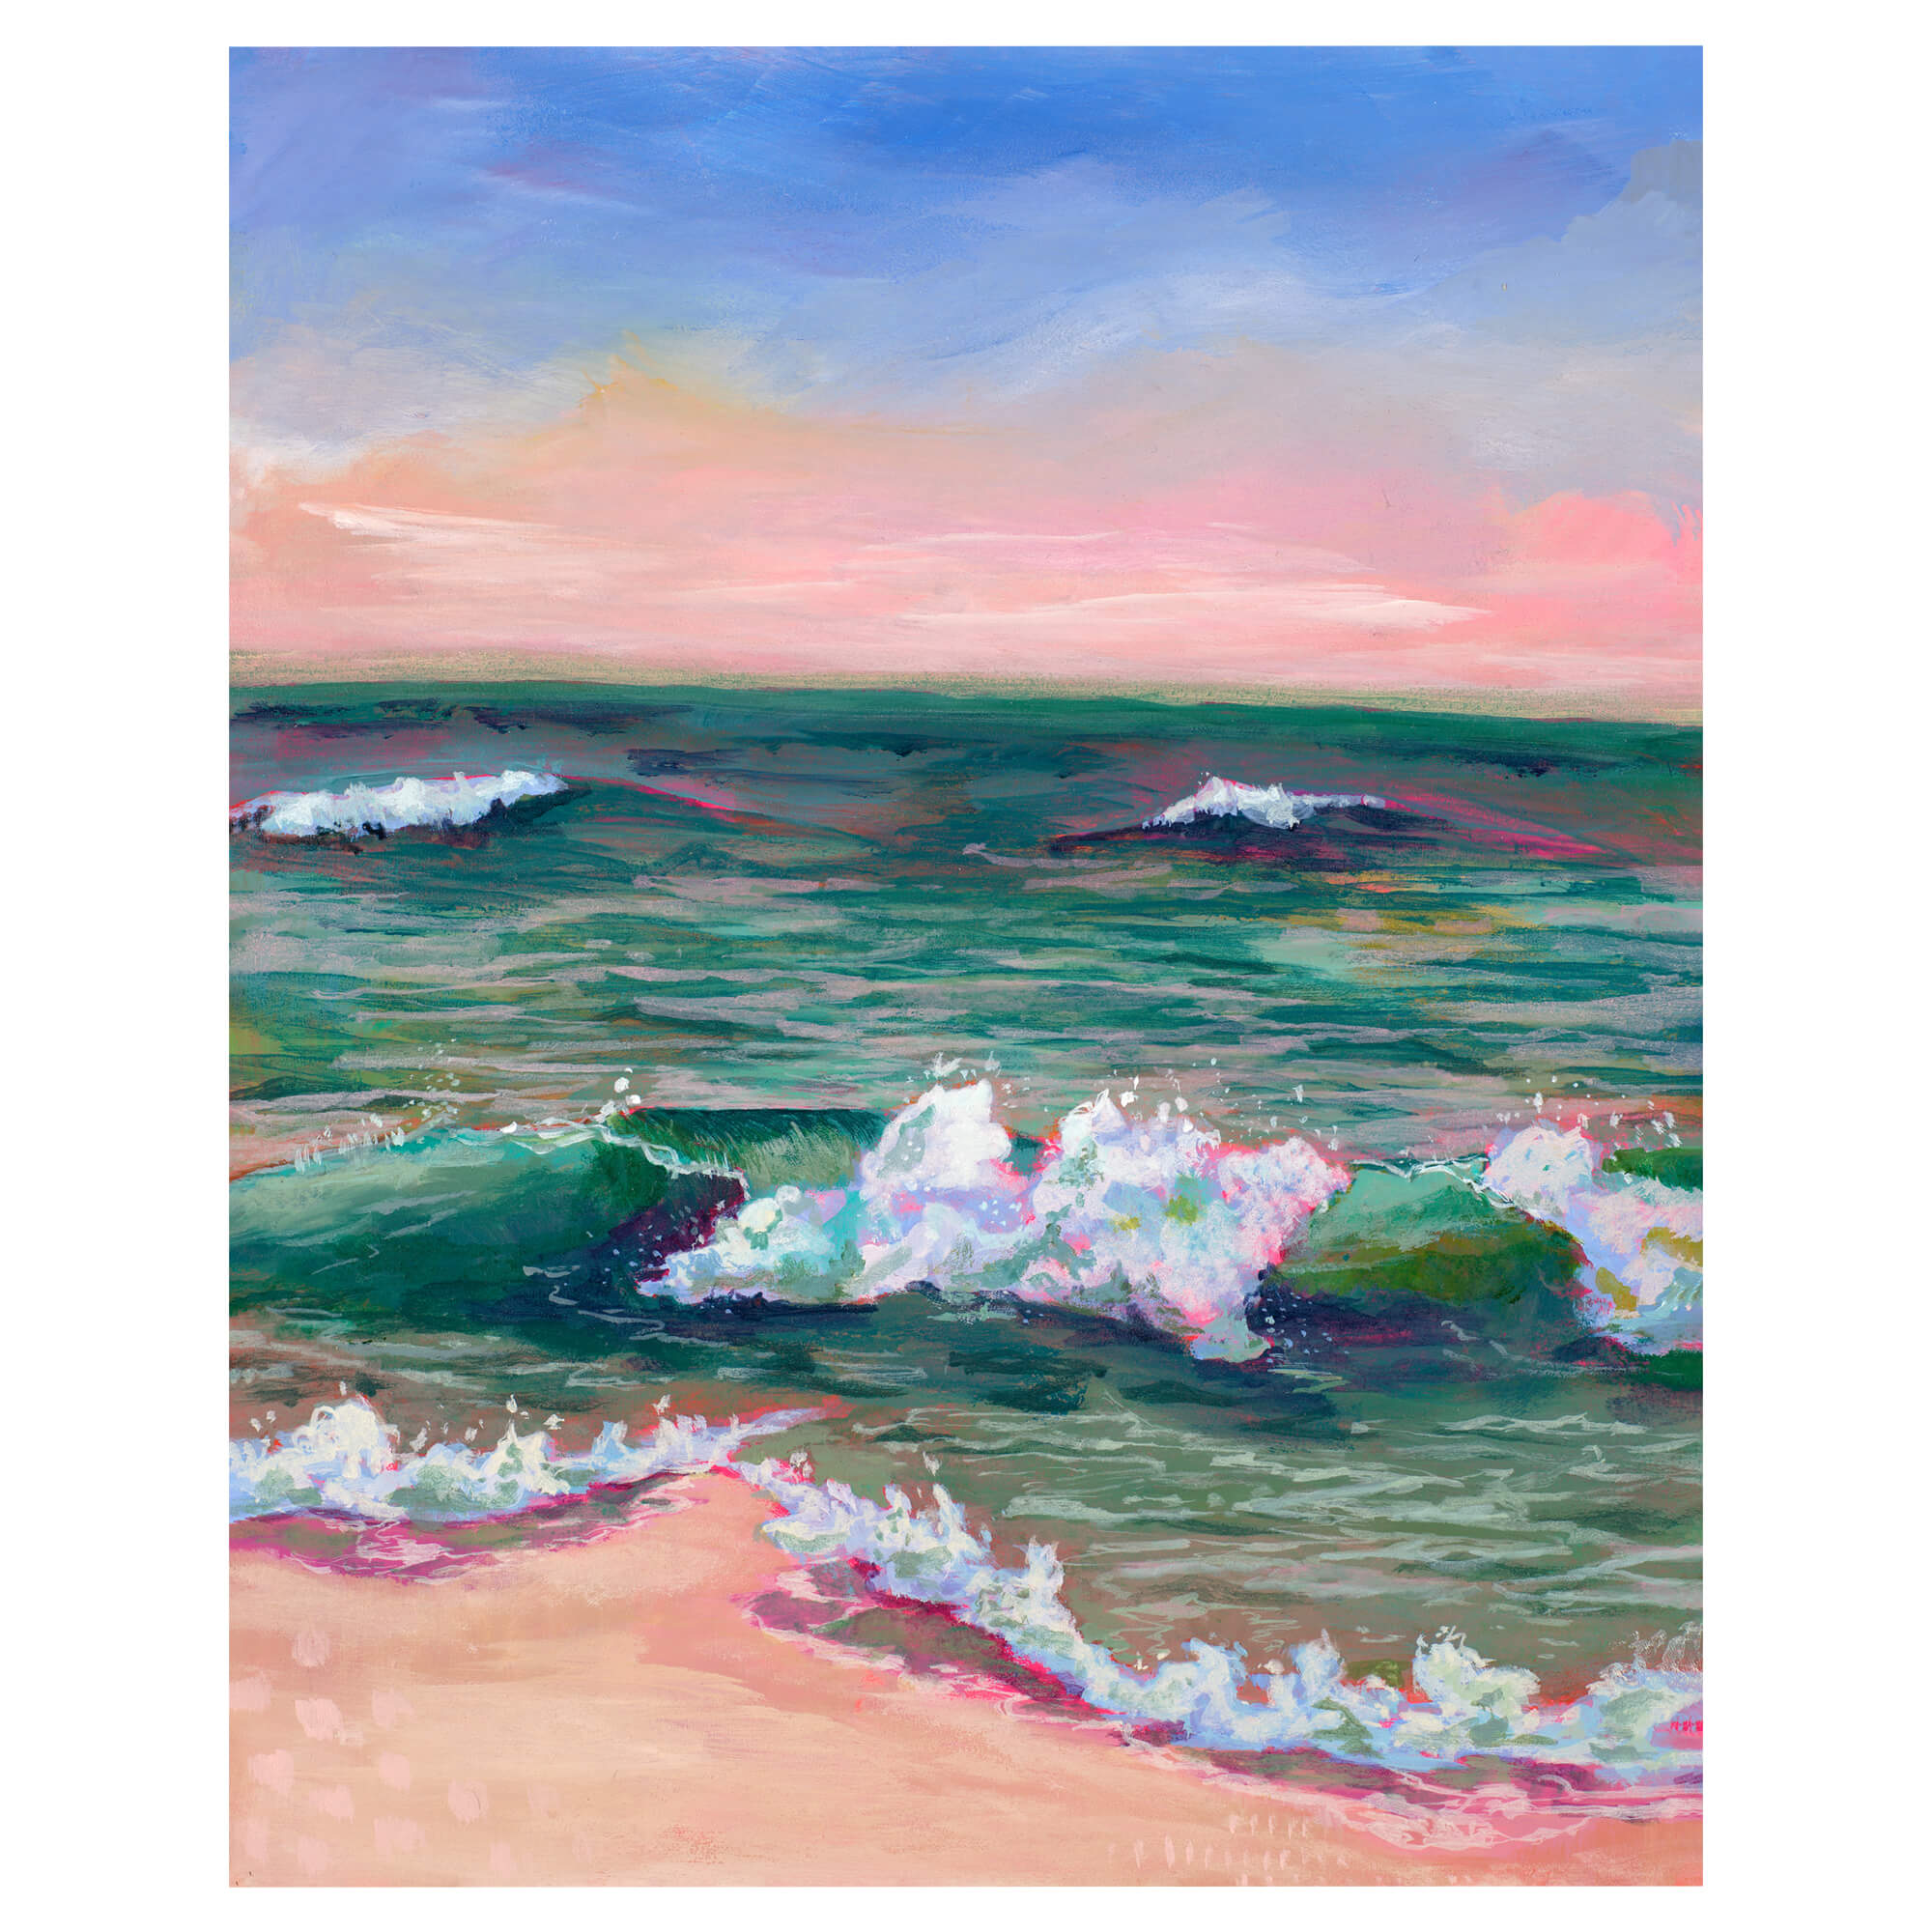 A sunset with calm waters in pastel hues by Hawaii artist Lindsay Wilkins 